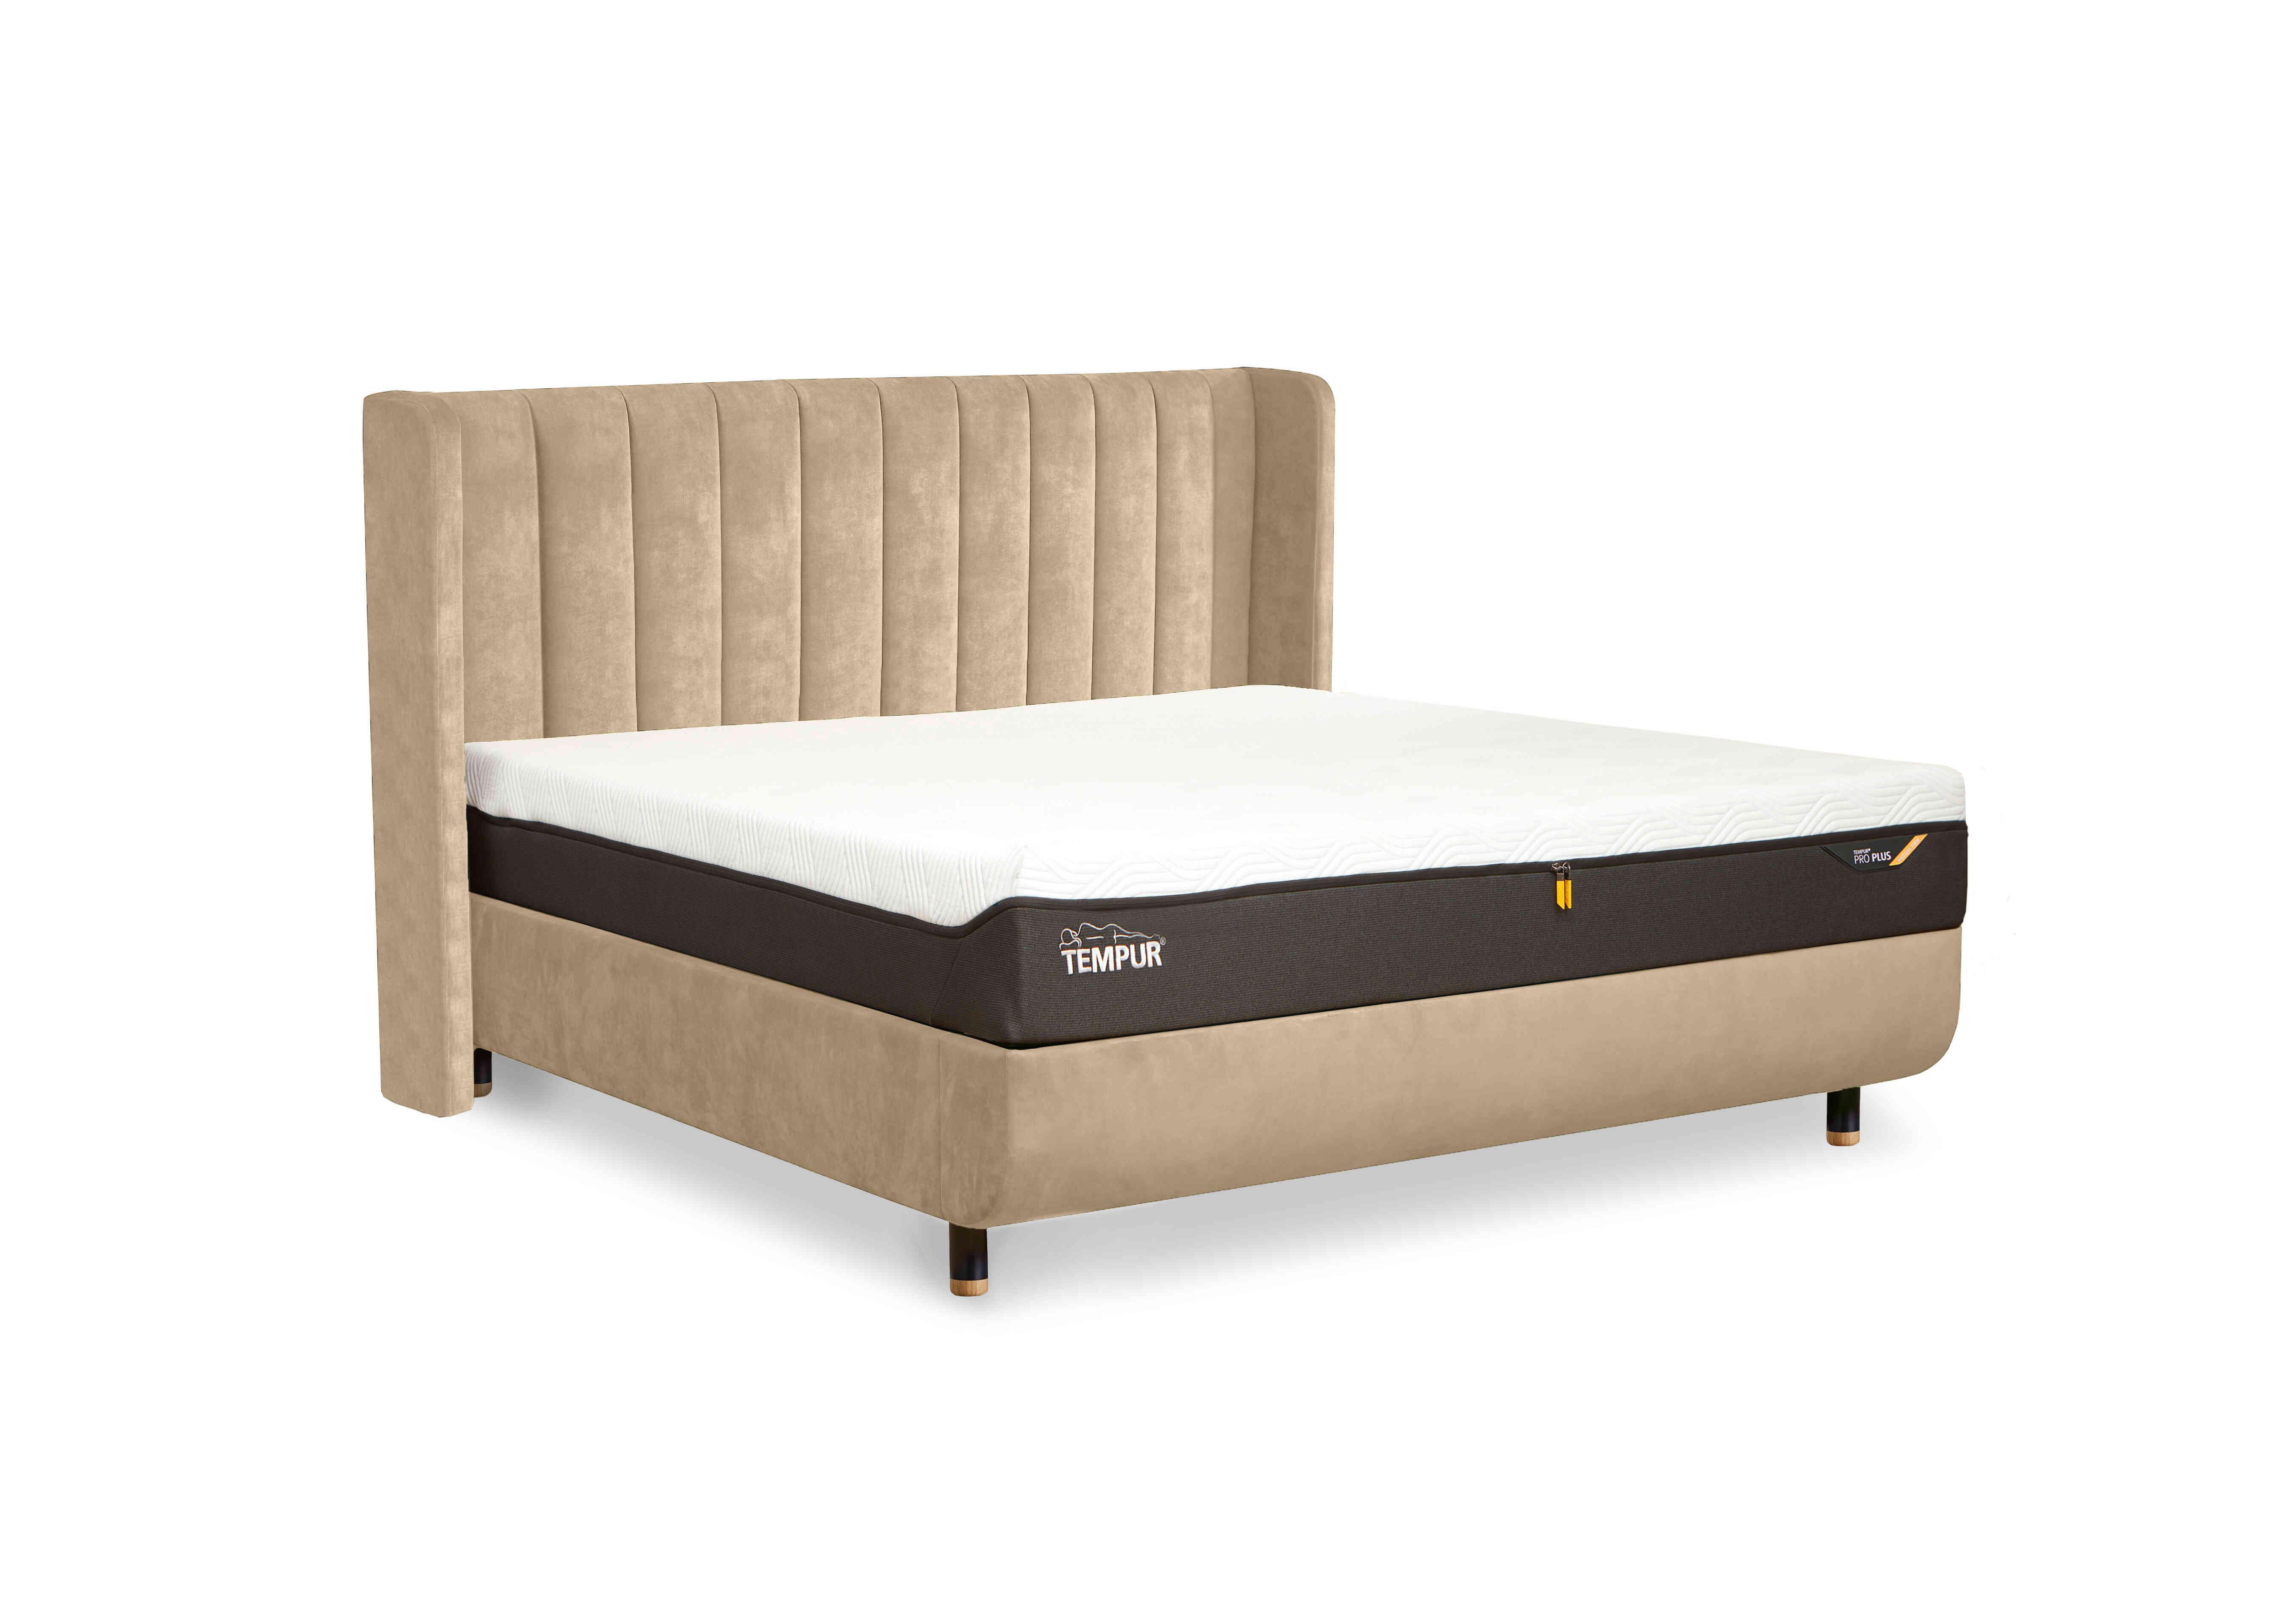 Arc Slatted Ottoman Bed Frame with Lodret Headboard in Sand-Natural Ash Feet on Furniture Village